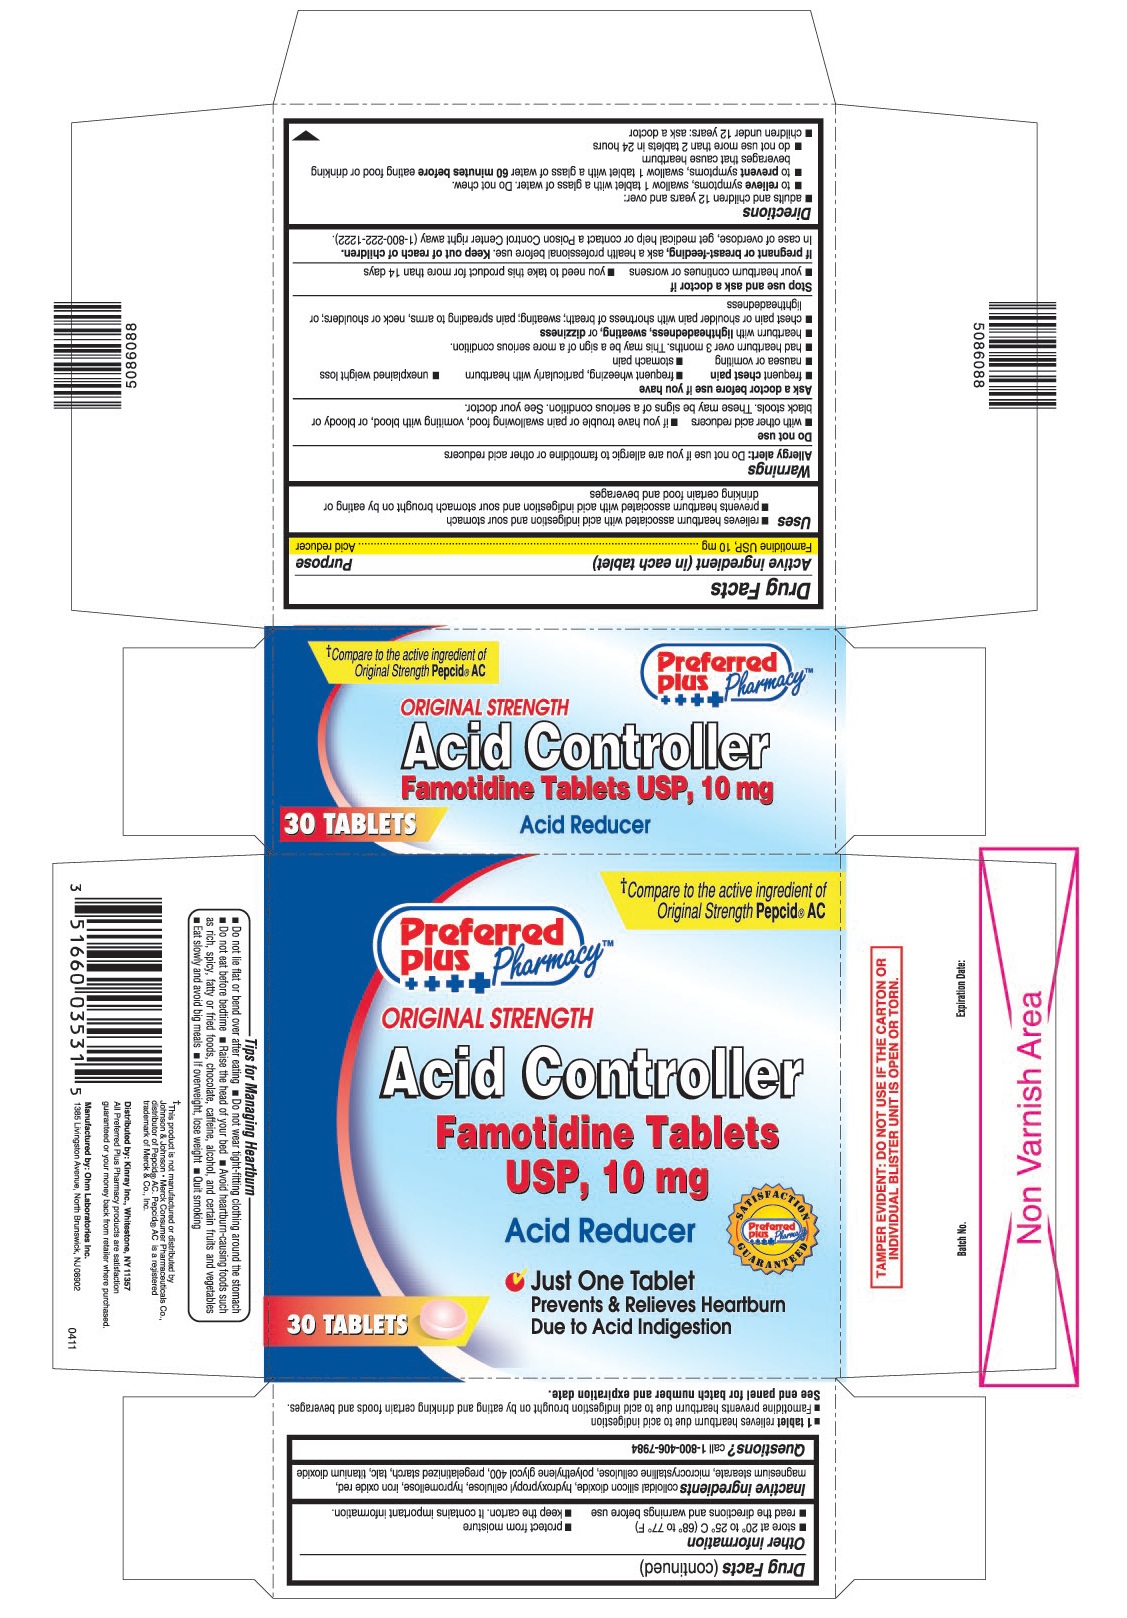 This is the 30 count blister carton label for Preferred Plus Famotidine Tablets USP, 10 mg.